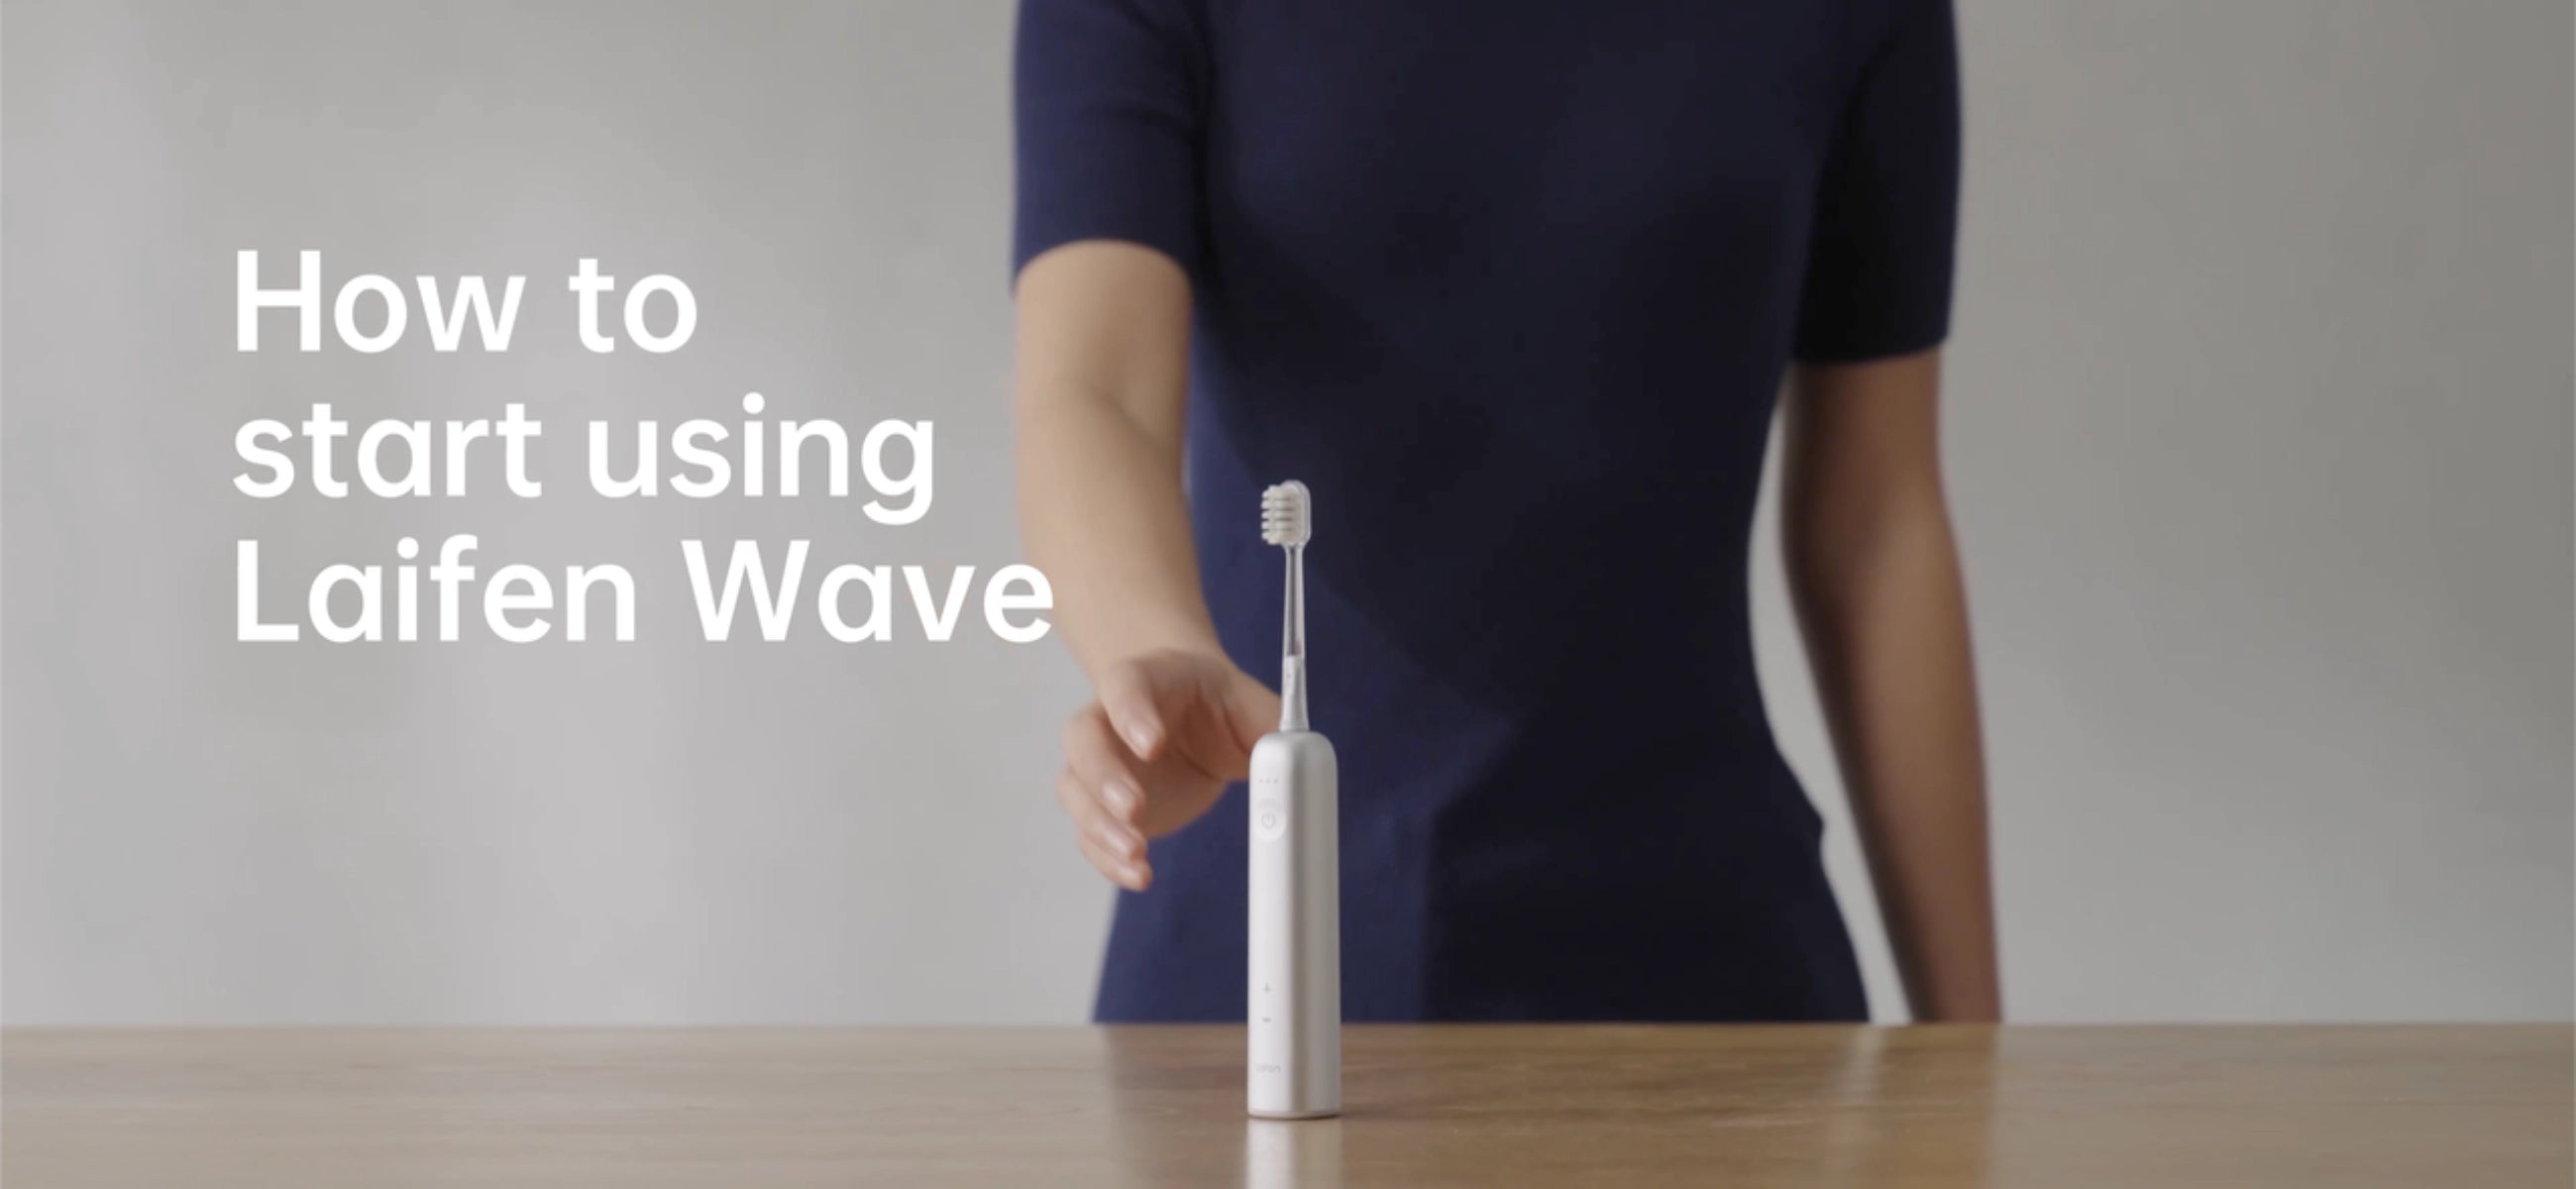 Laifen Wave: Beginner's guide to first-time use